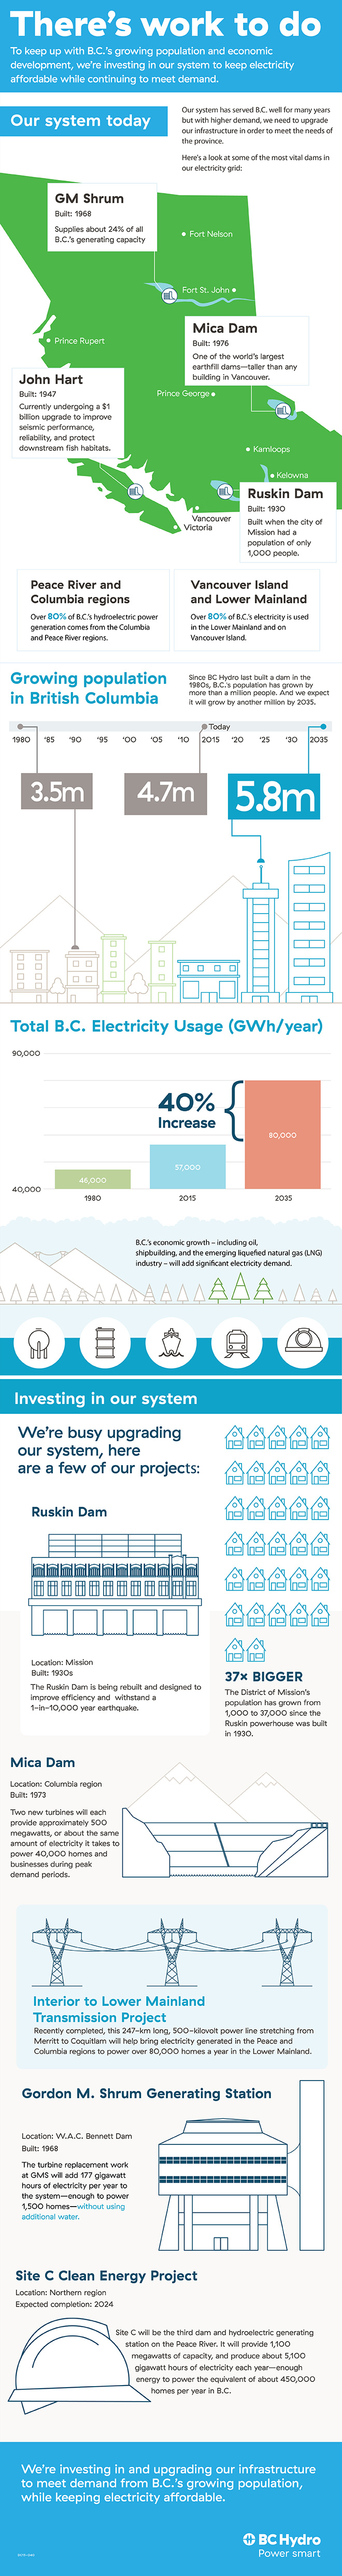 Infographic about where we're investing to meet future energy demand